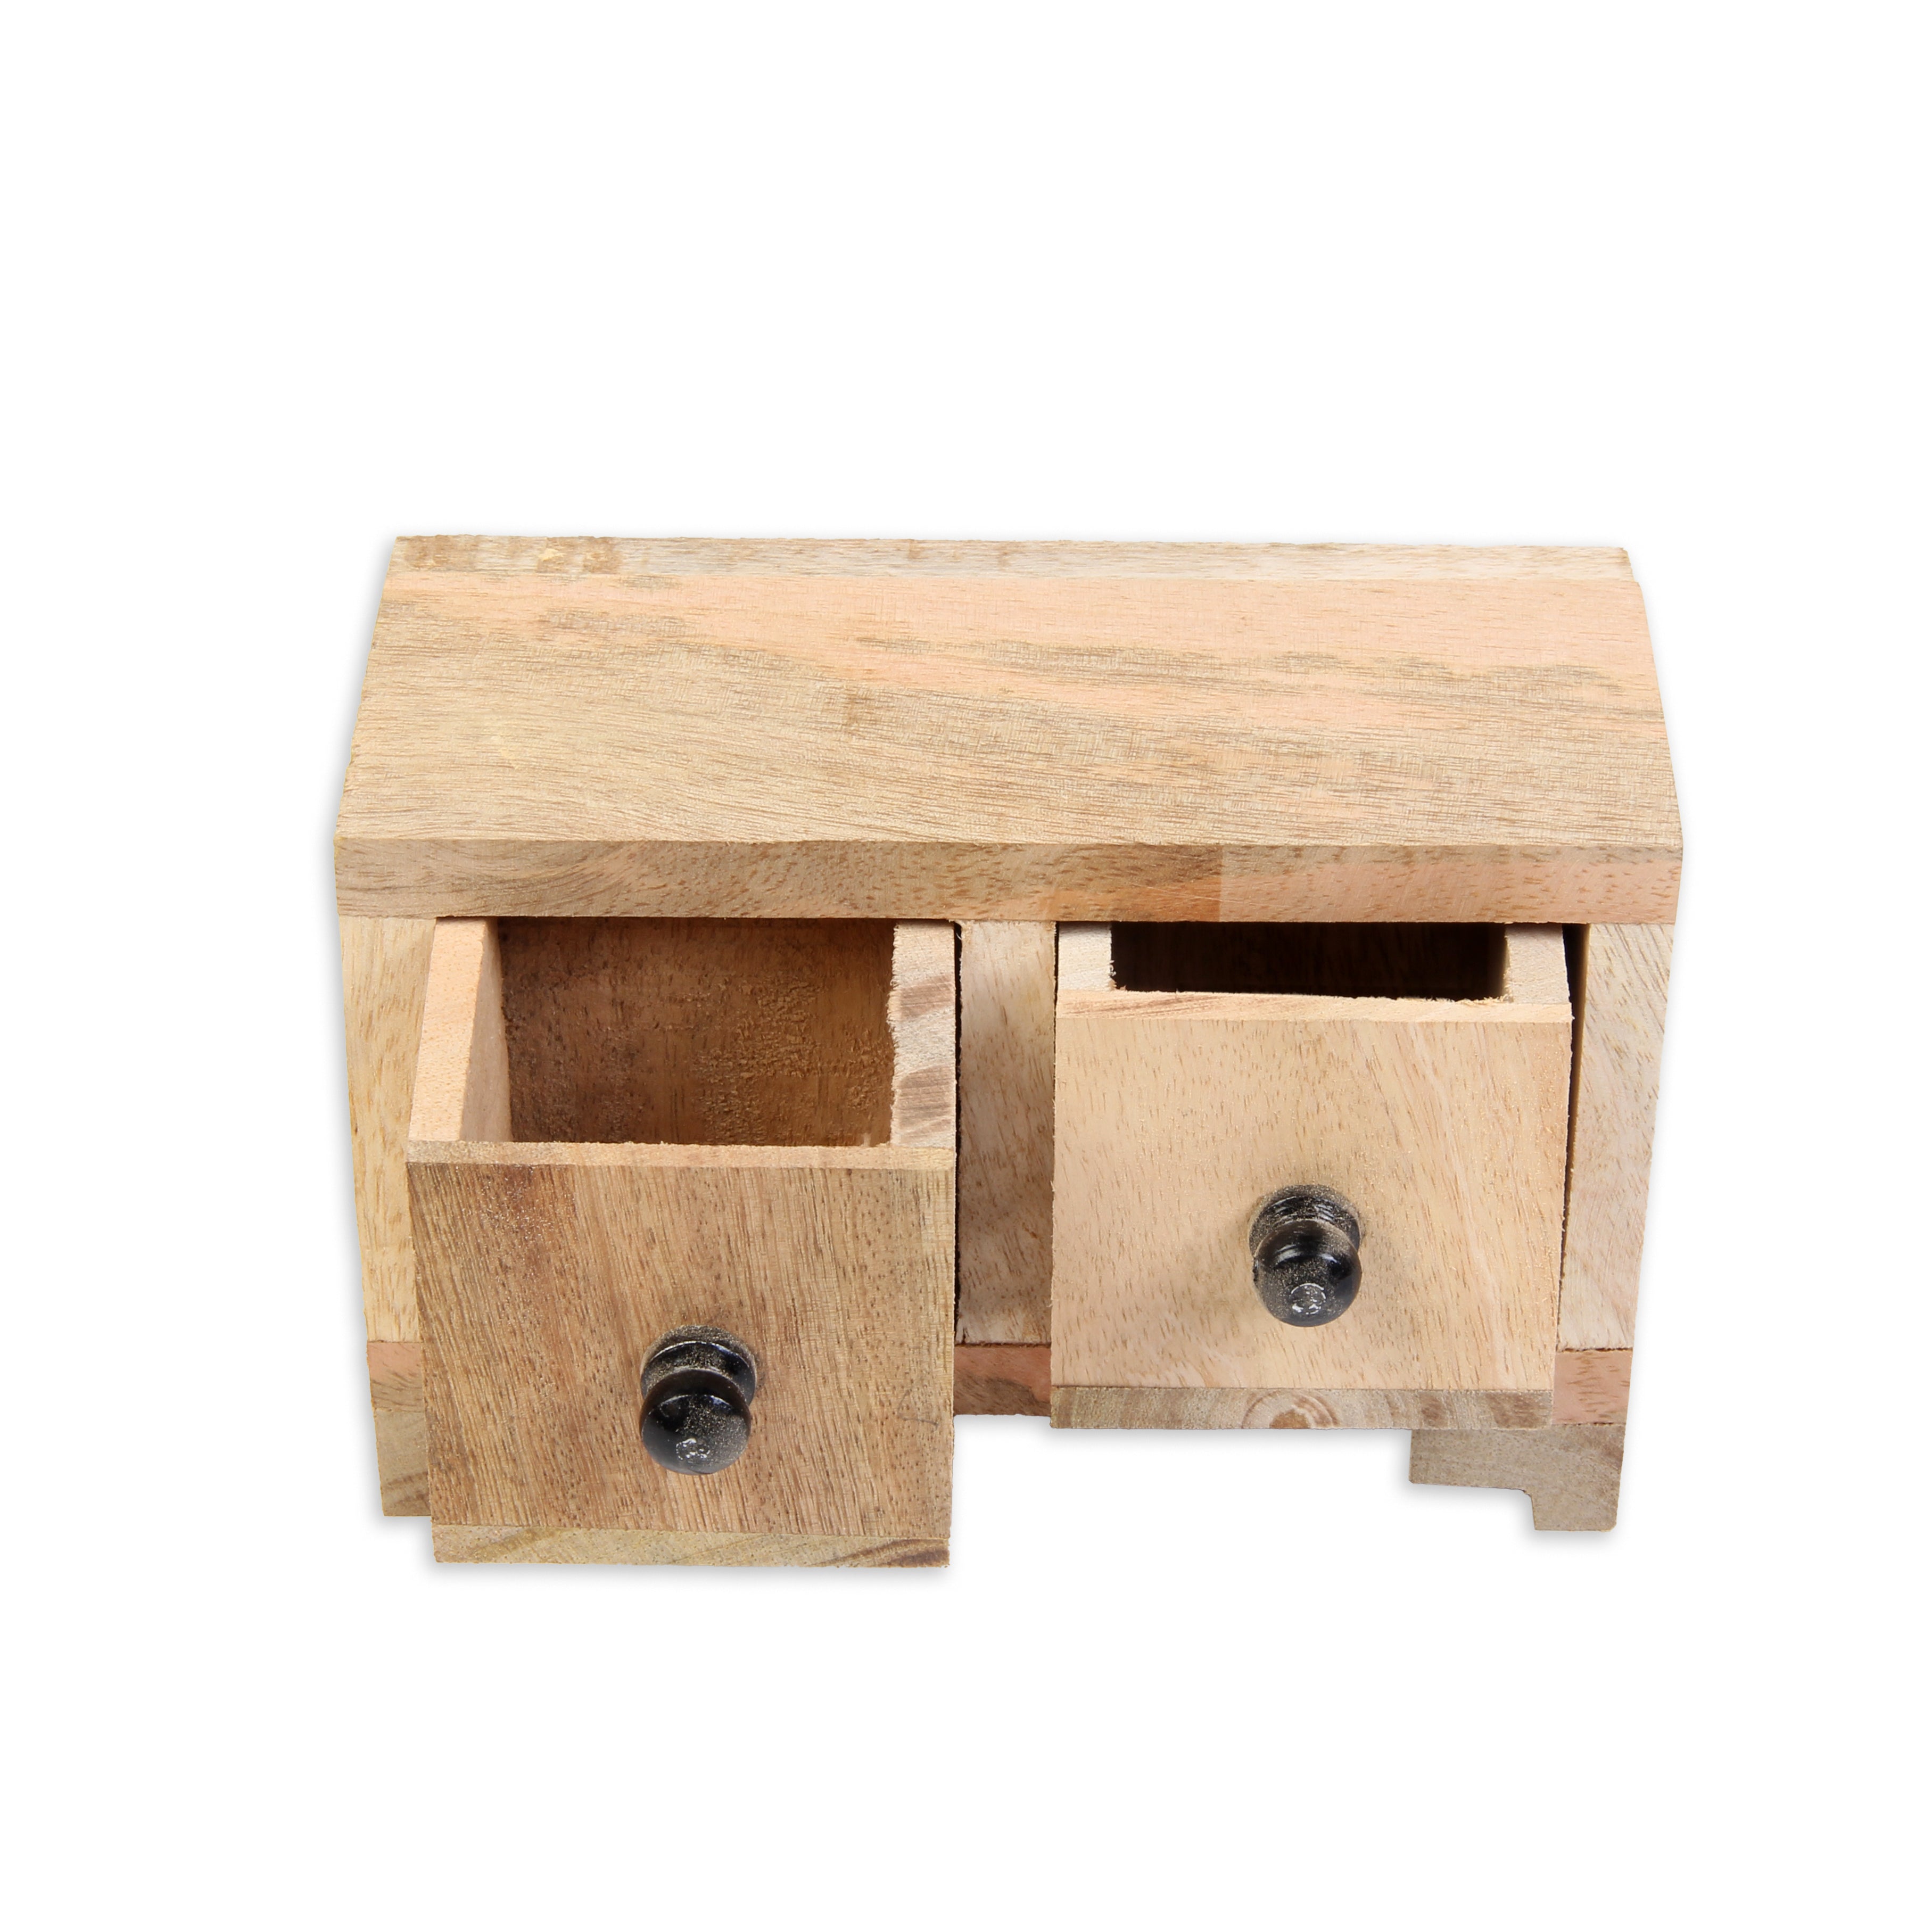 Wooden Double Drawer Organizer (2 Compartments) 3 X 3.5 X 6inch 1pc